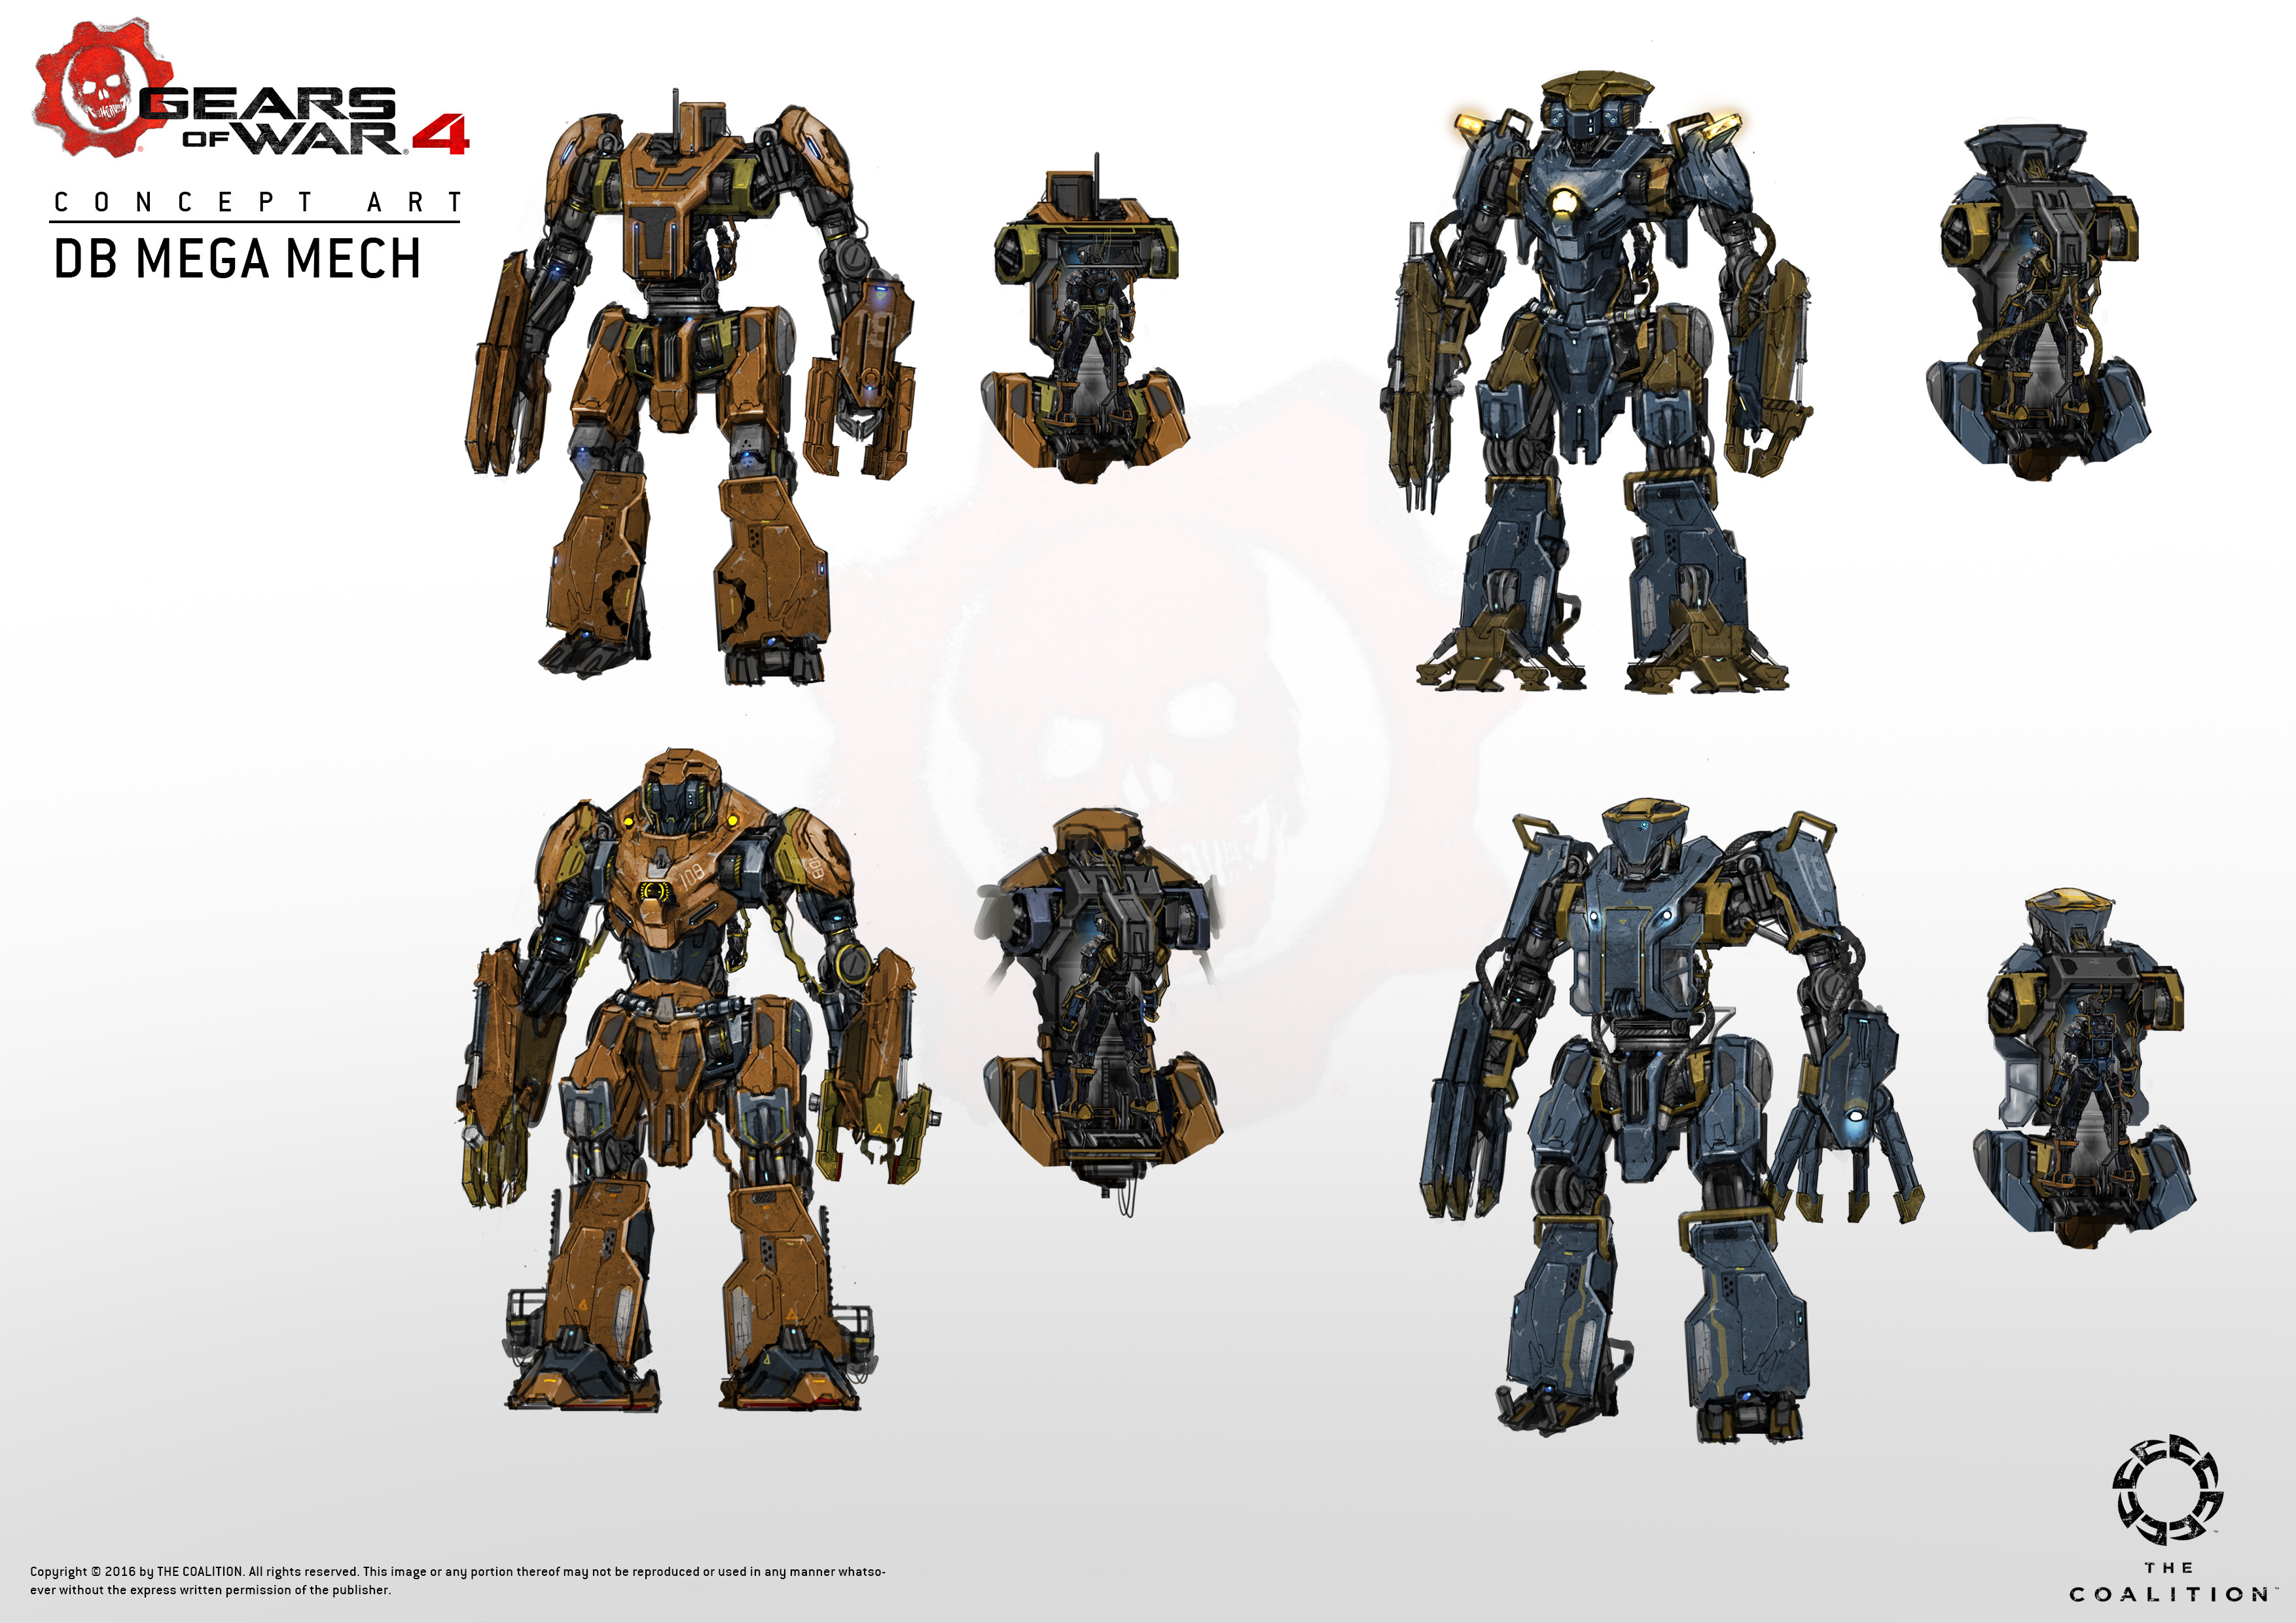 Early explorations for the Mega Mech